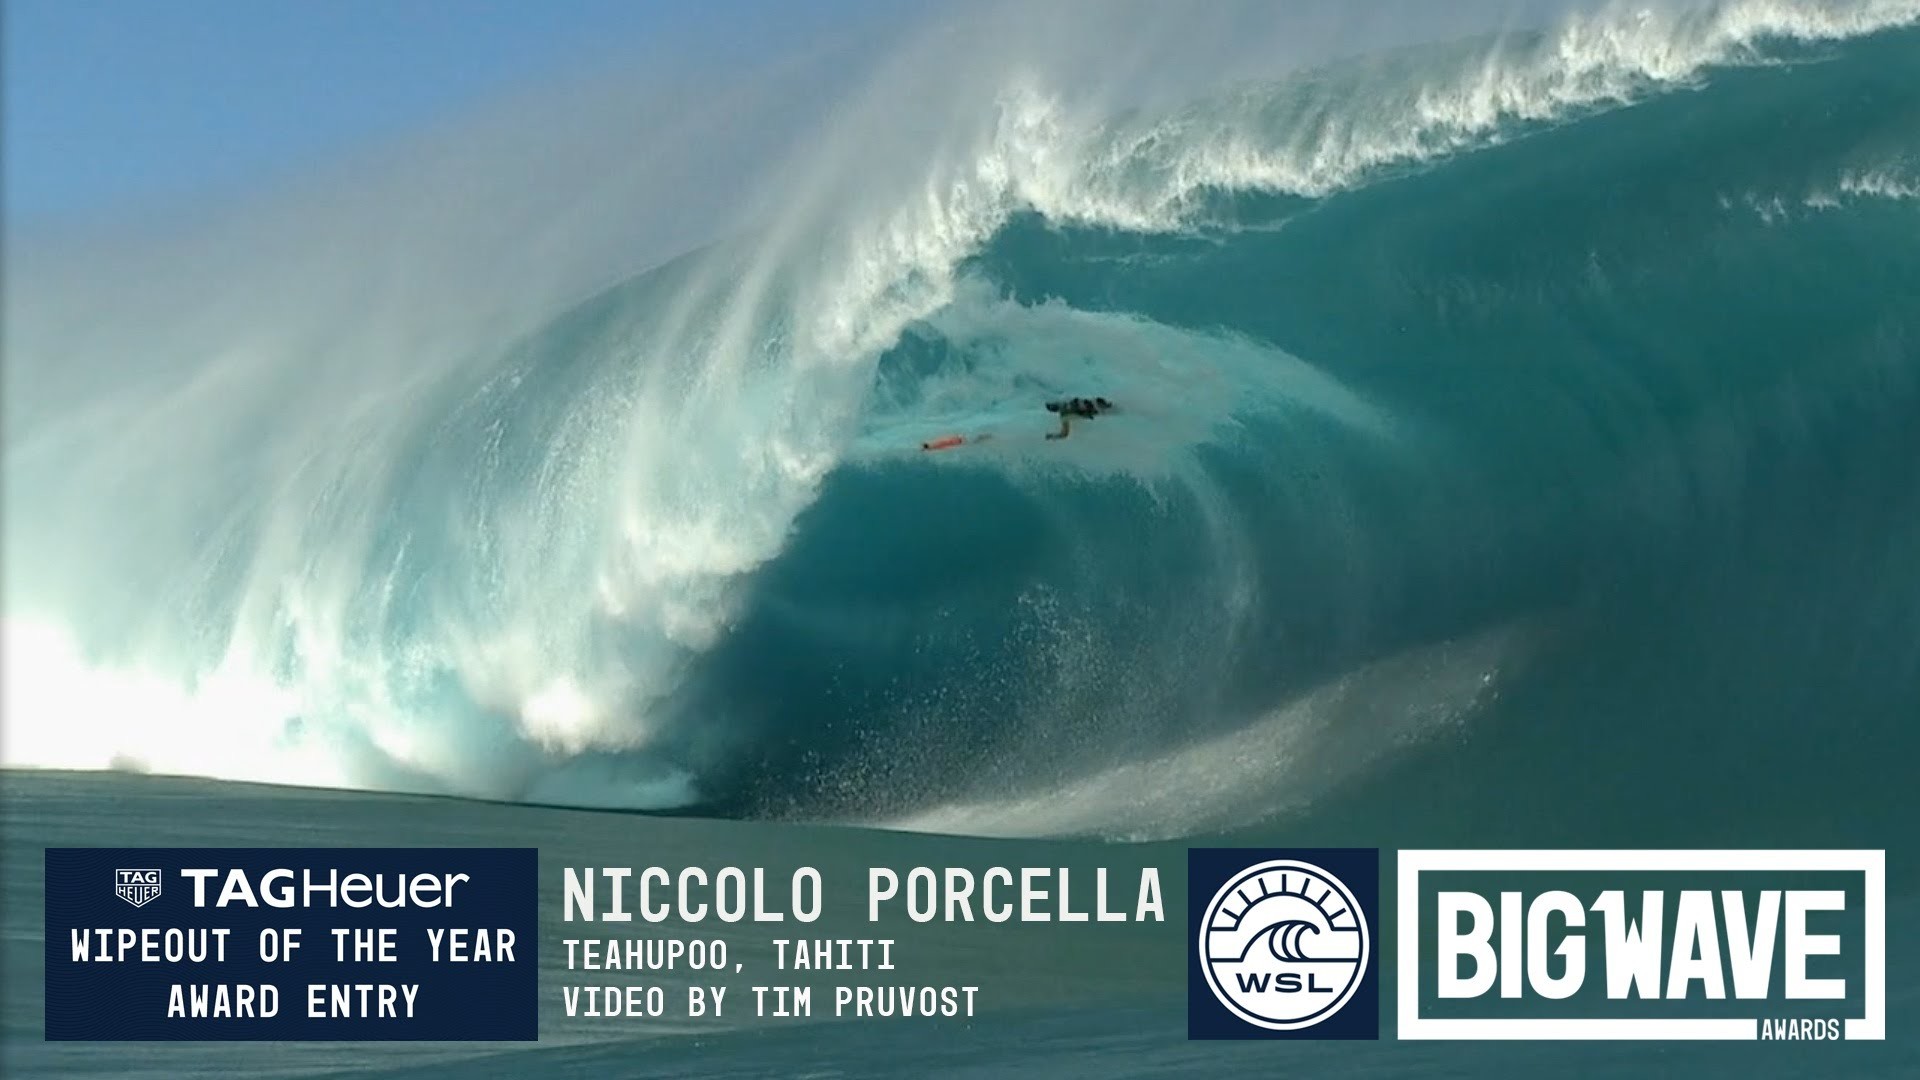 1920x1080 Niccolo Porcella at Teahupoo 2 - 2016 TAG Heuer Wipeout Entry - WSL Big Wave  Awards - YouTube